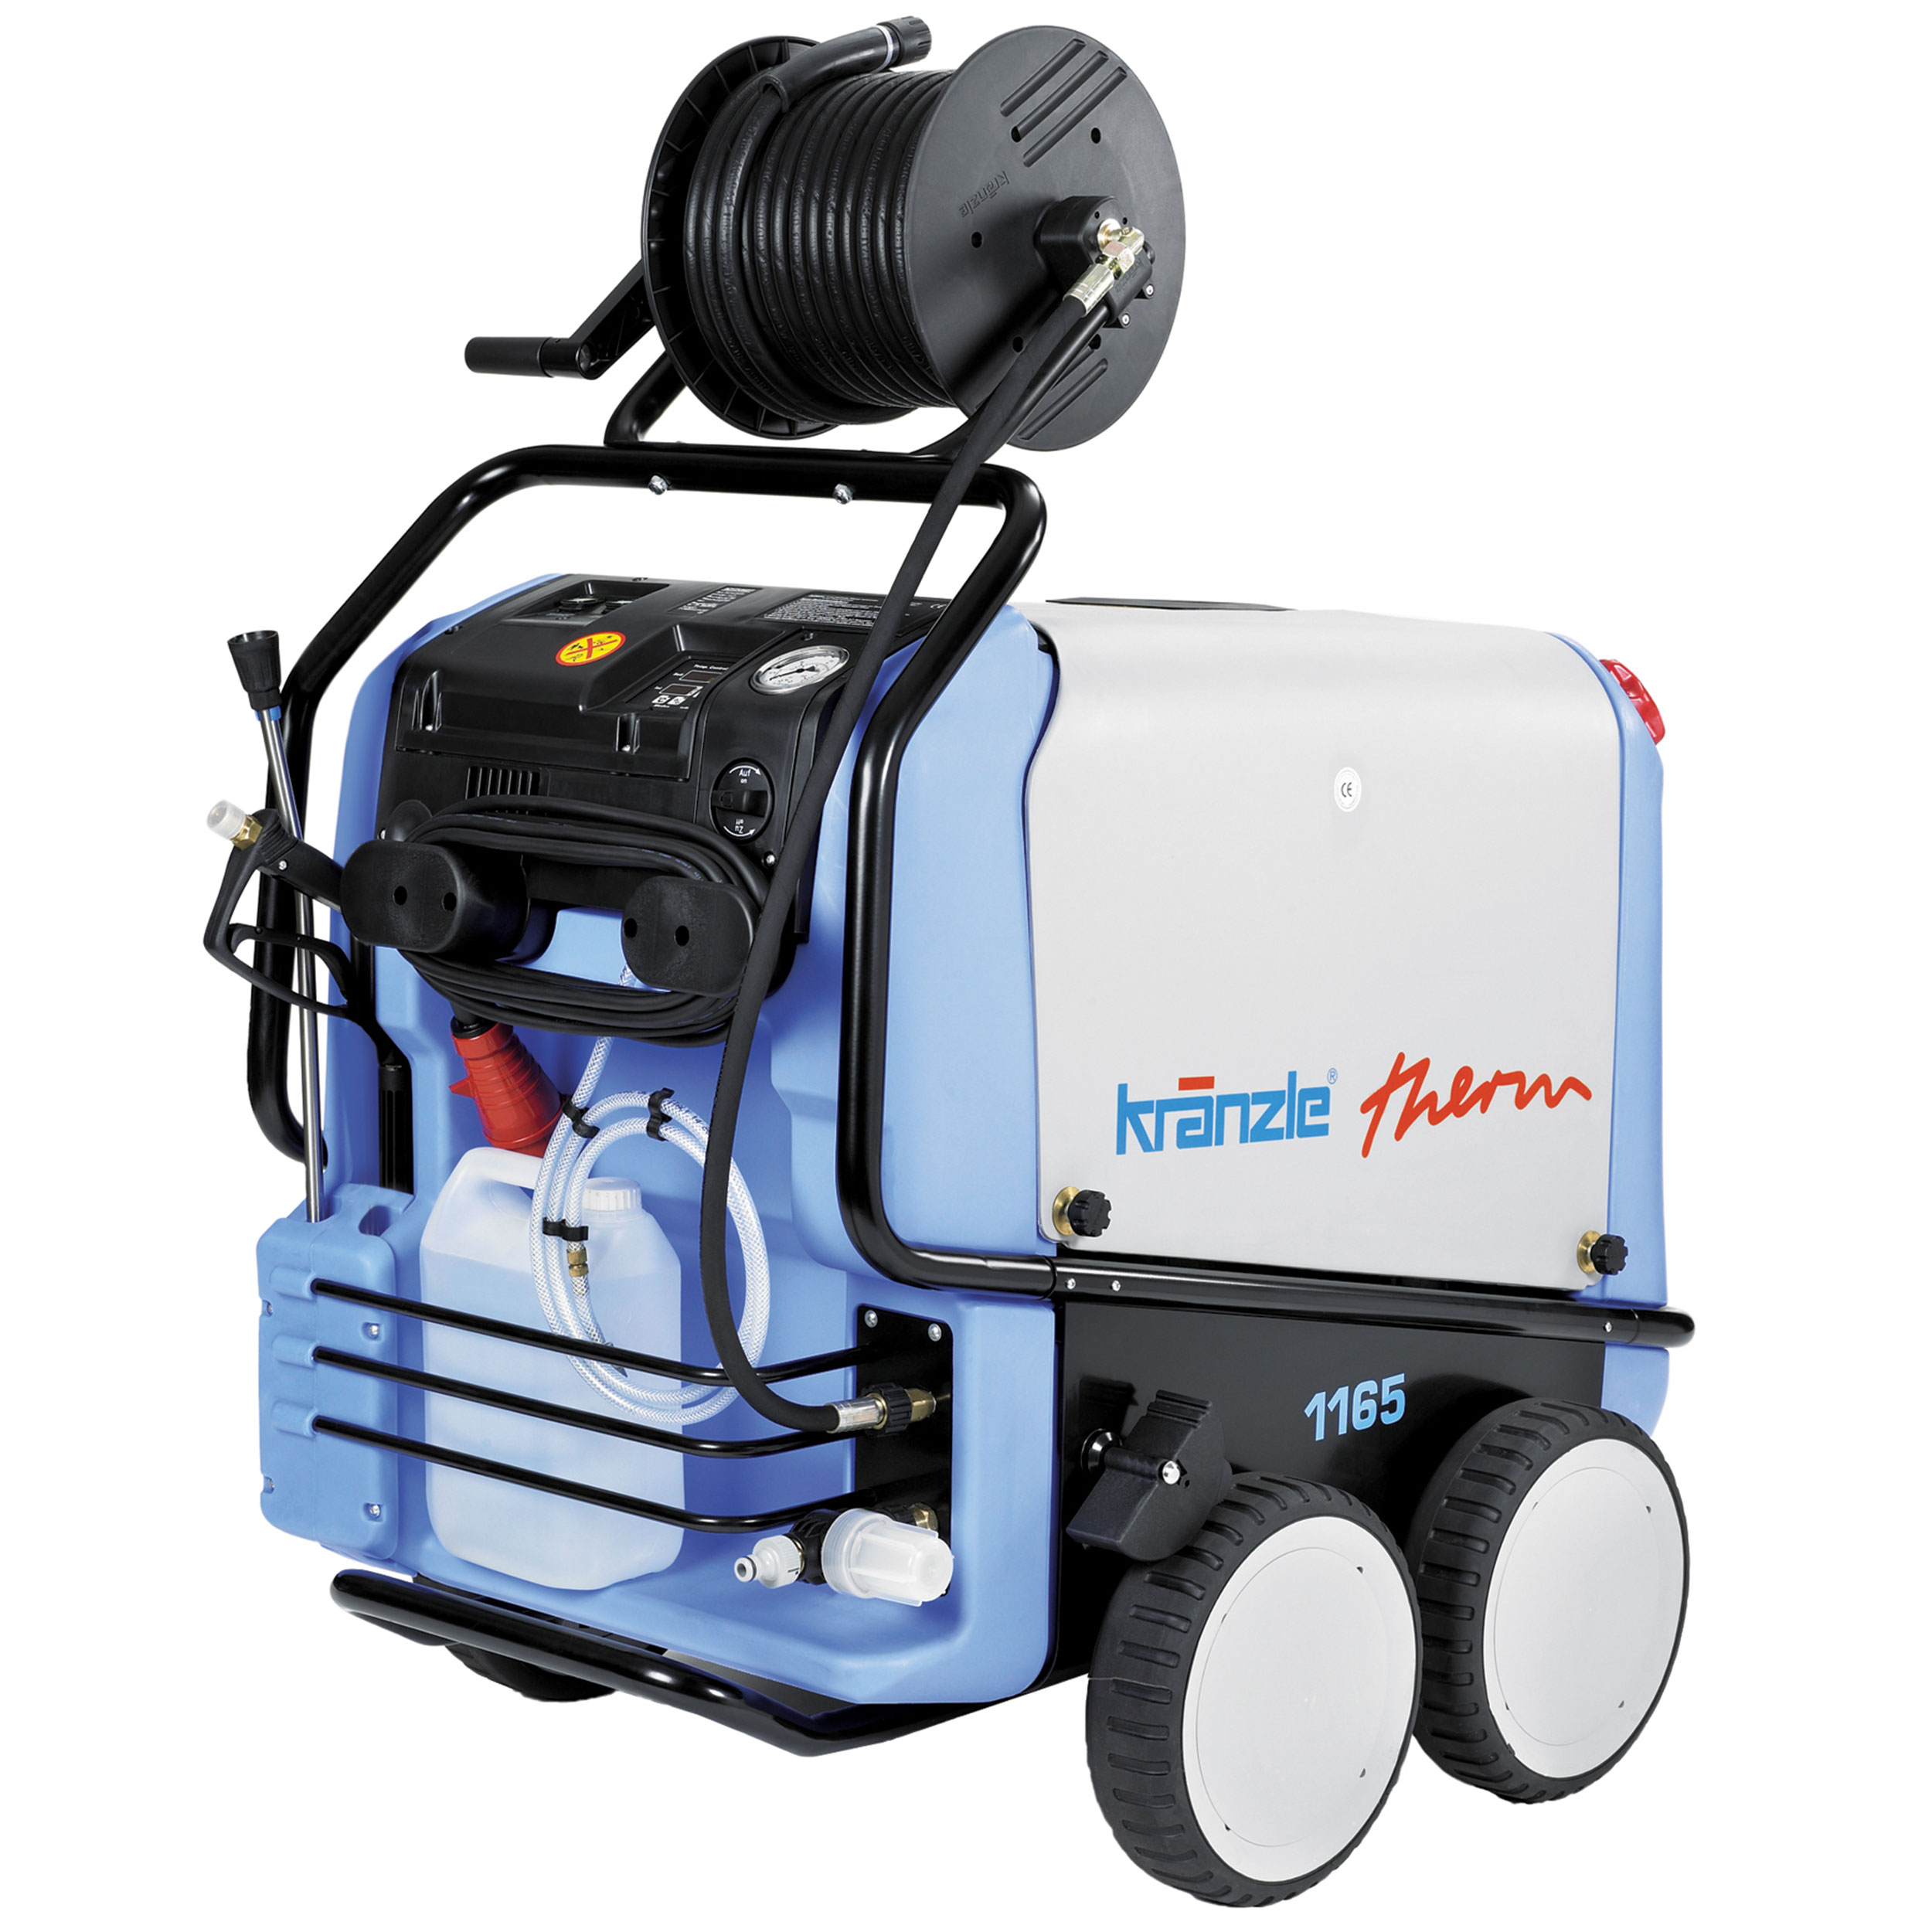 Therm 1165tst Pressure Washer, Hot Water, 440v, 20a, 3ph